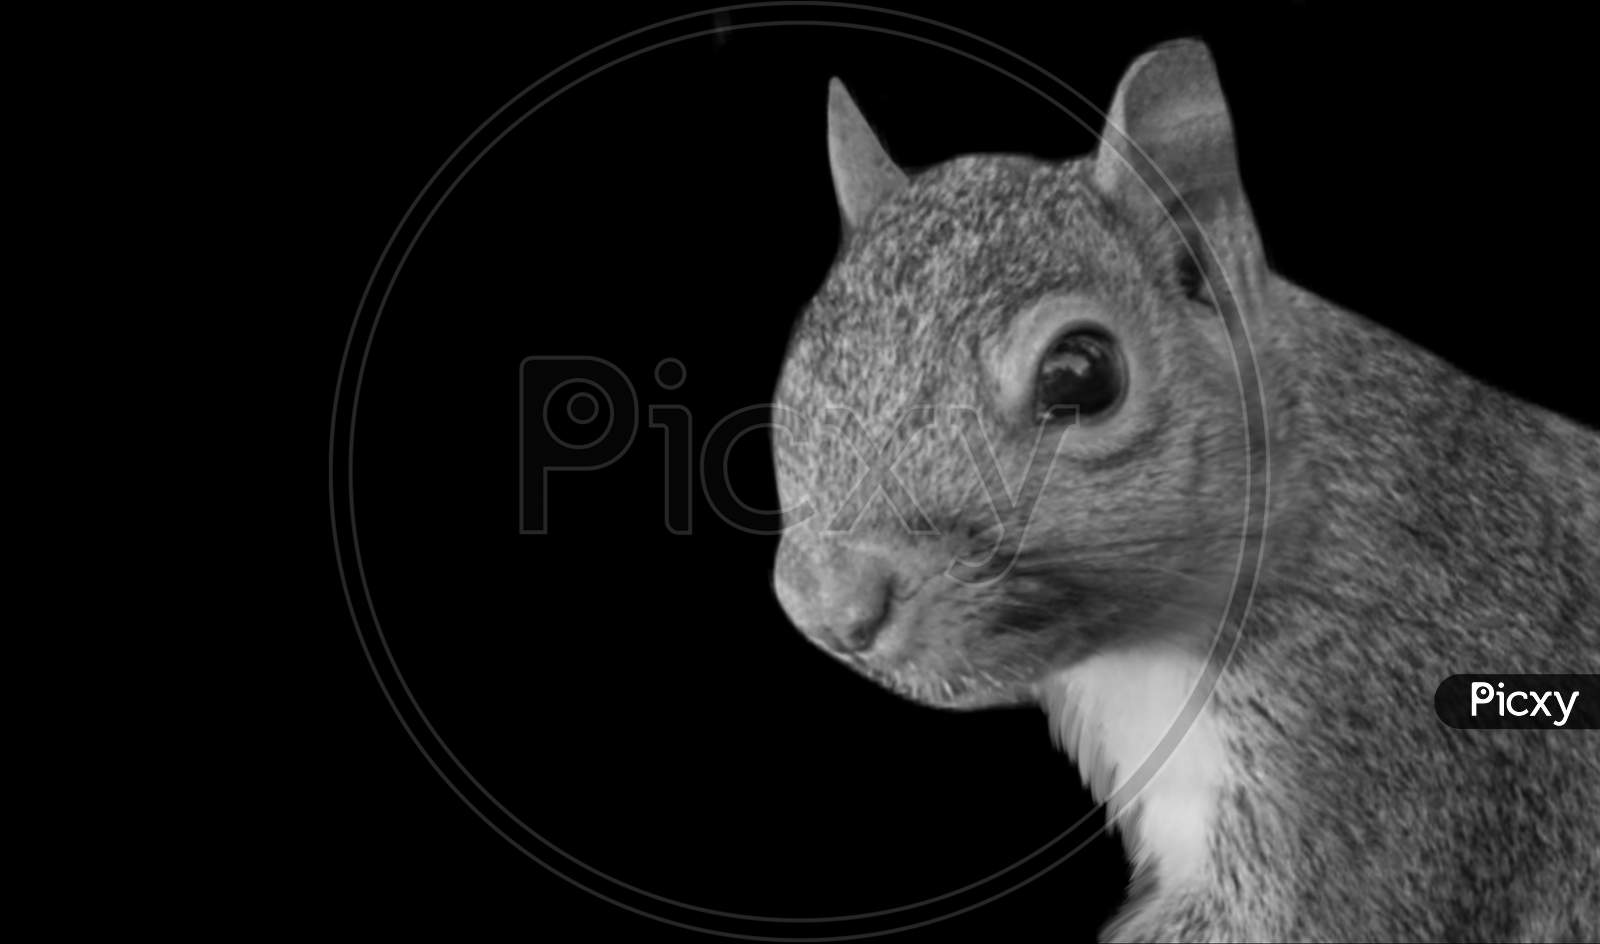 Cute Little Squirrel Face On The Black Background